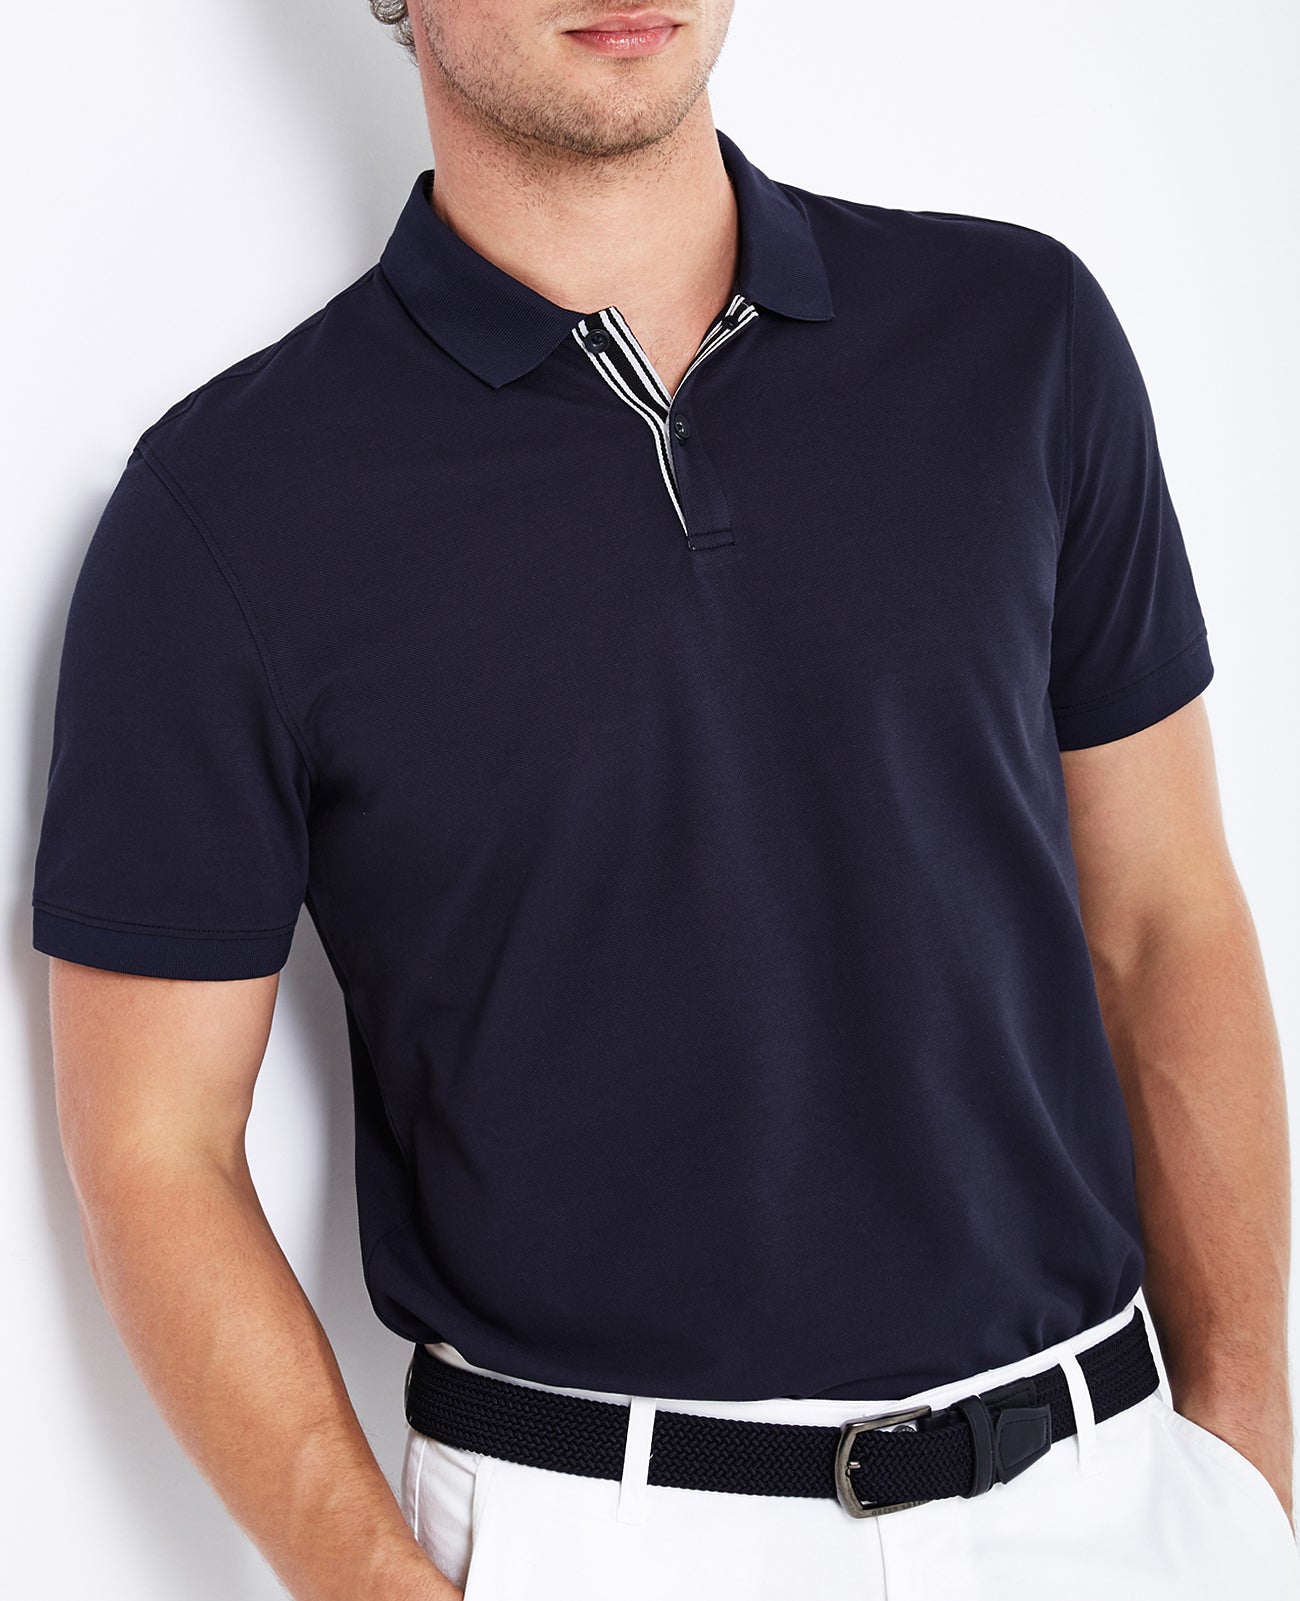 Berrian Polo Naval Blue Green Label Collection Men Tops Photo 4